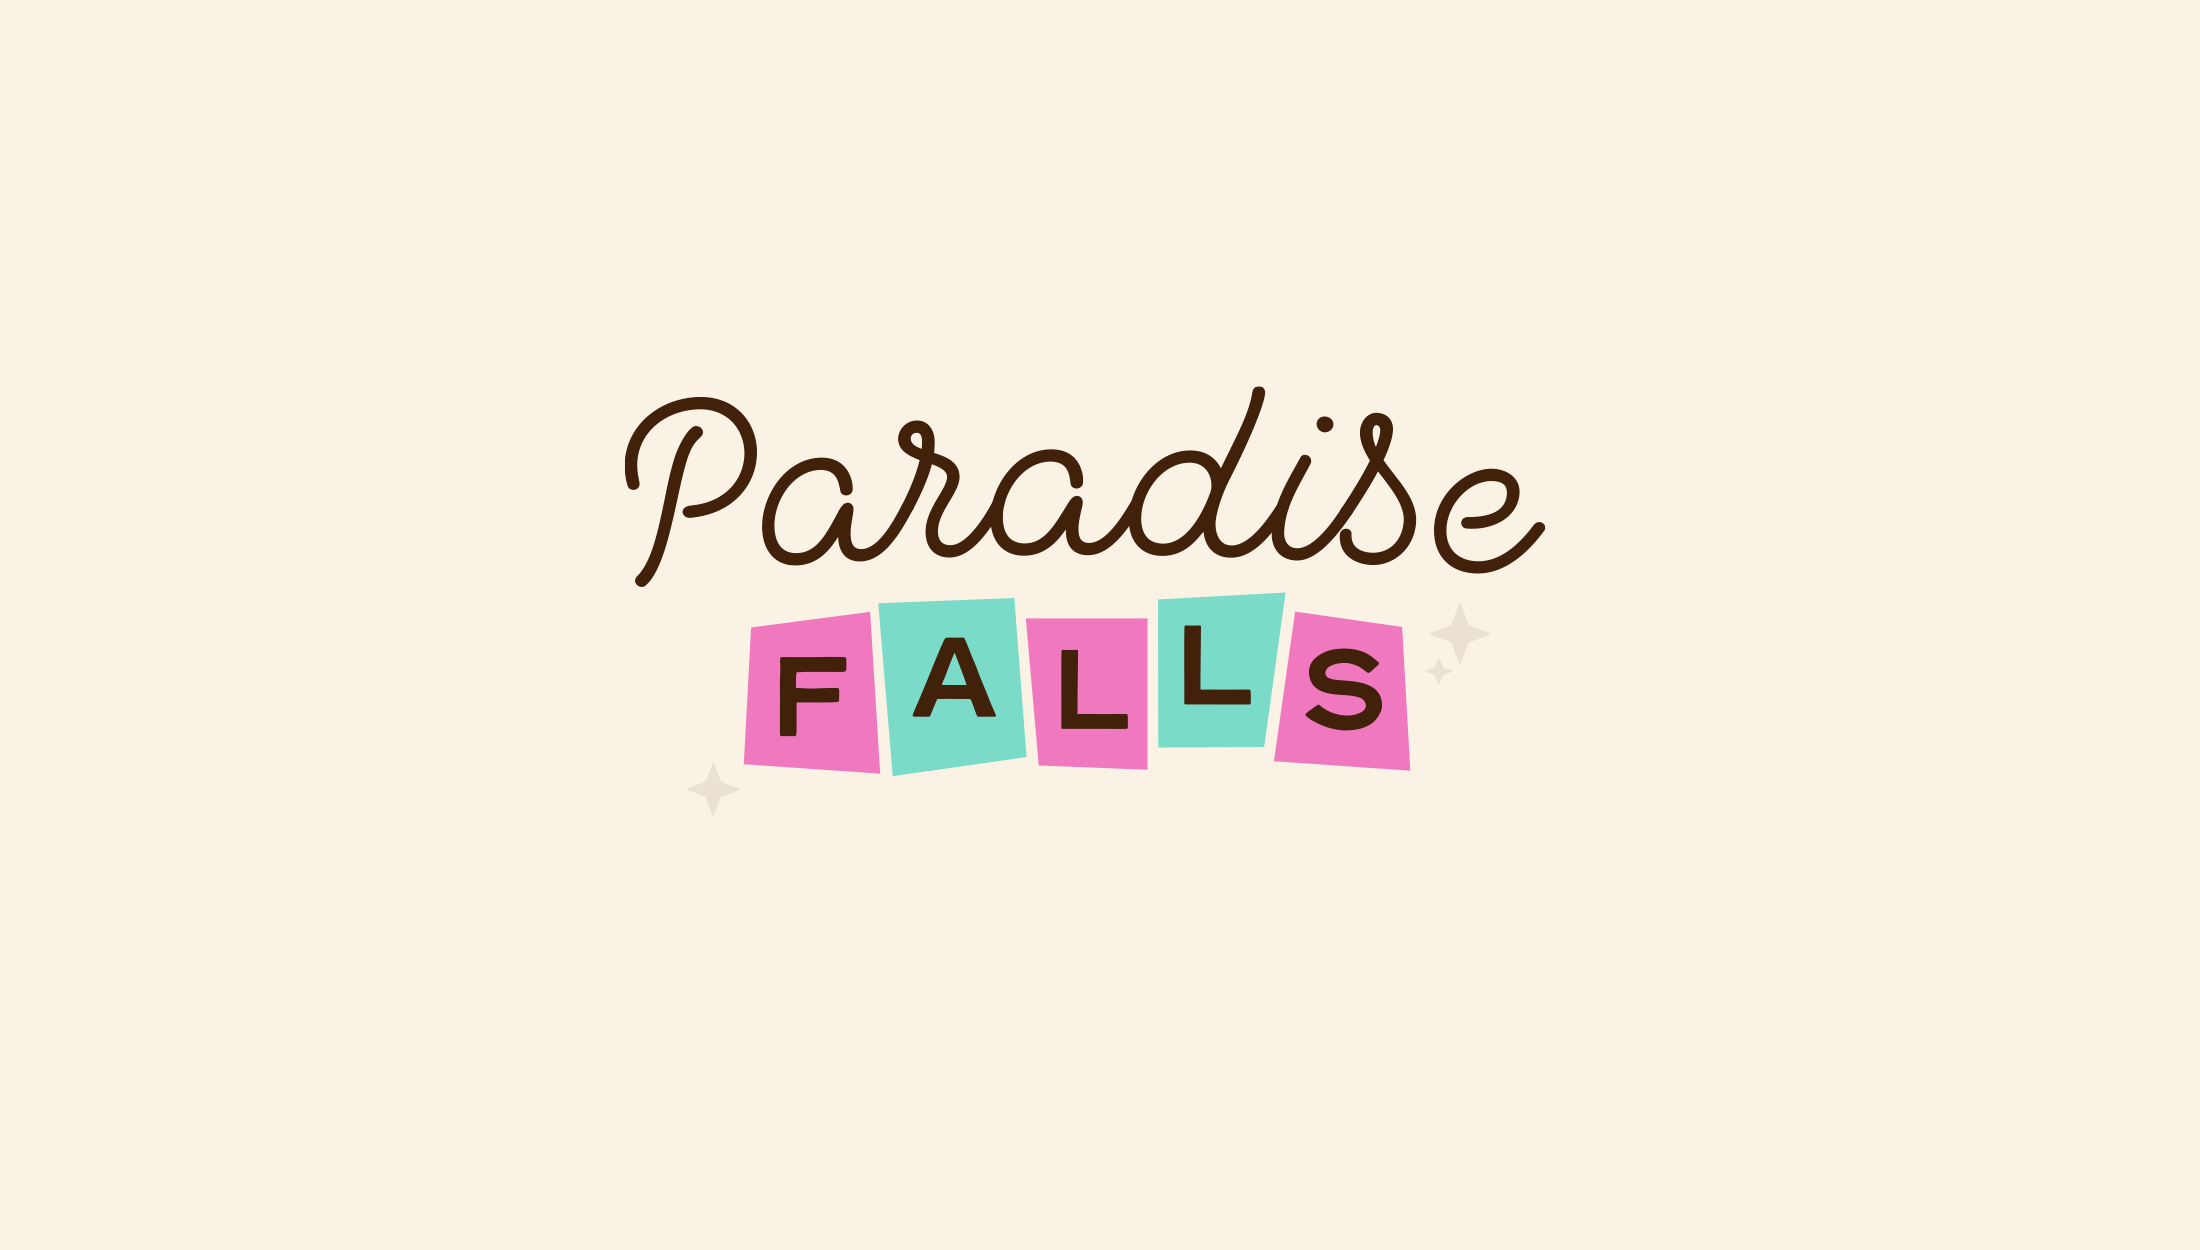 Packaging design for Paradise Falls Creative, a Disney merchandising online store - designed by Wiltshire-based graphic designer, Kaye Huett